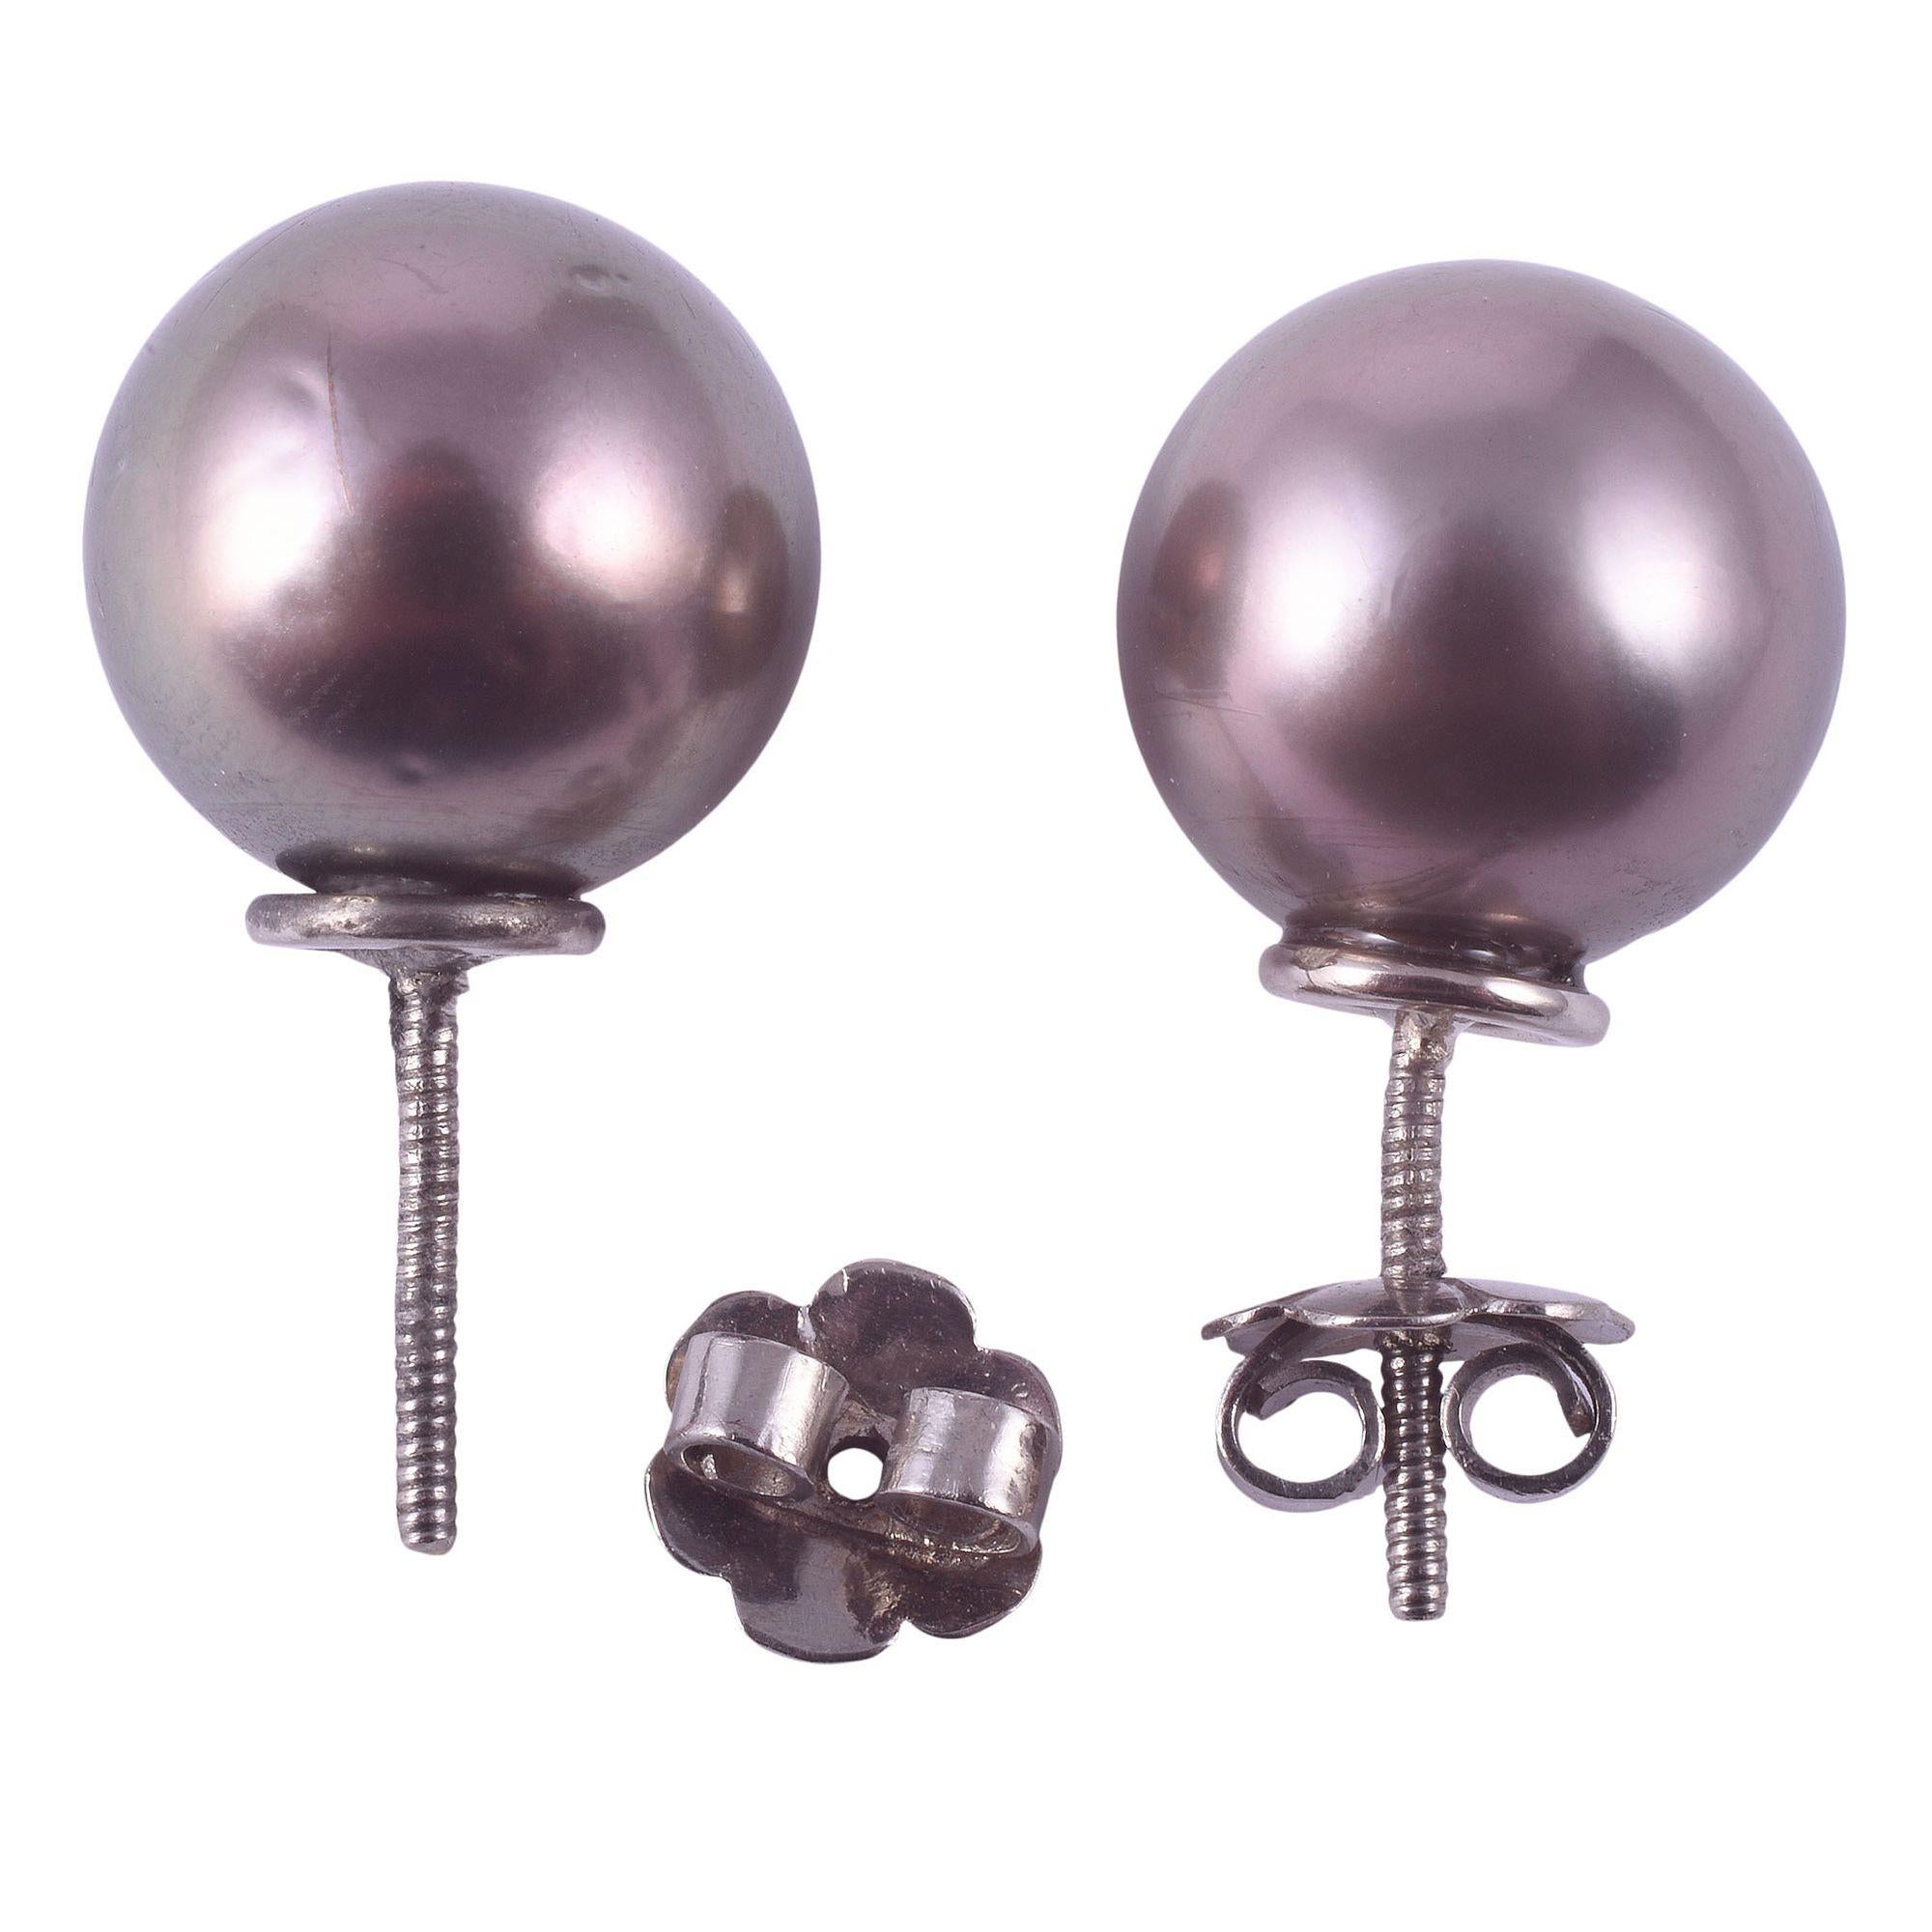 Estate Tahitian pearl stud earrings. These stud earrings are crafted in 14 karat gold and feature 13.5-13.6mm Tahitian pearls that are dark gray in color with green and rose overtones and light blemishes. The earrings are screwbacks. [KIMH 594]